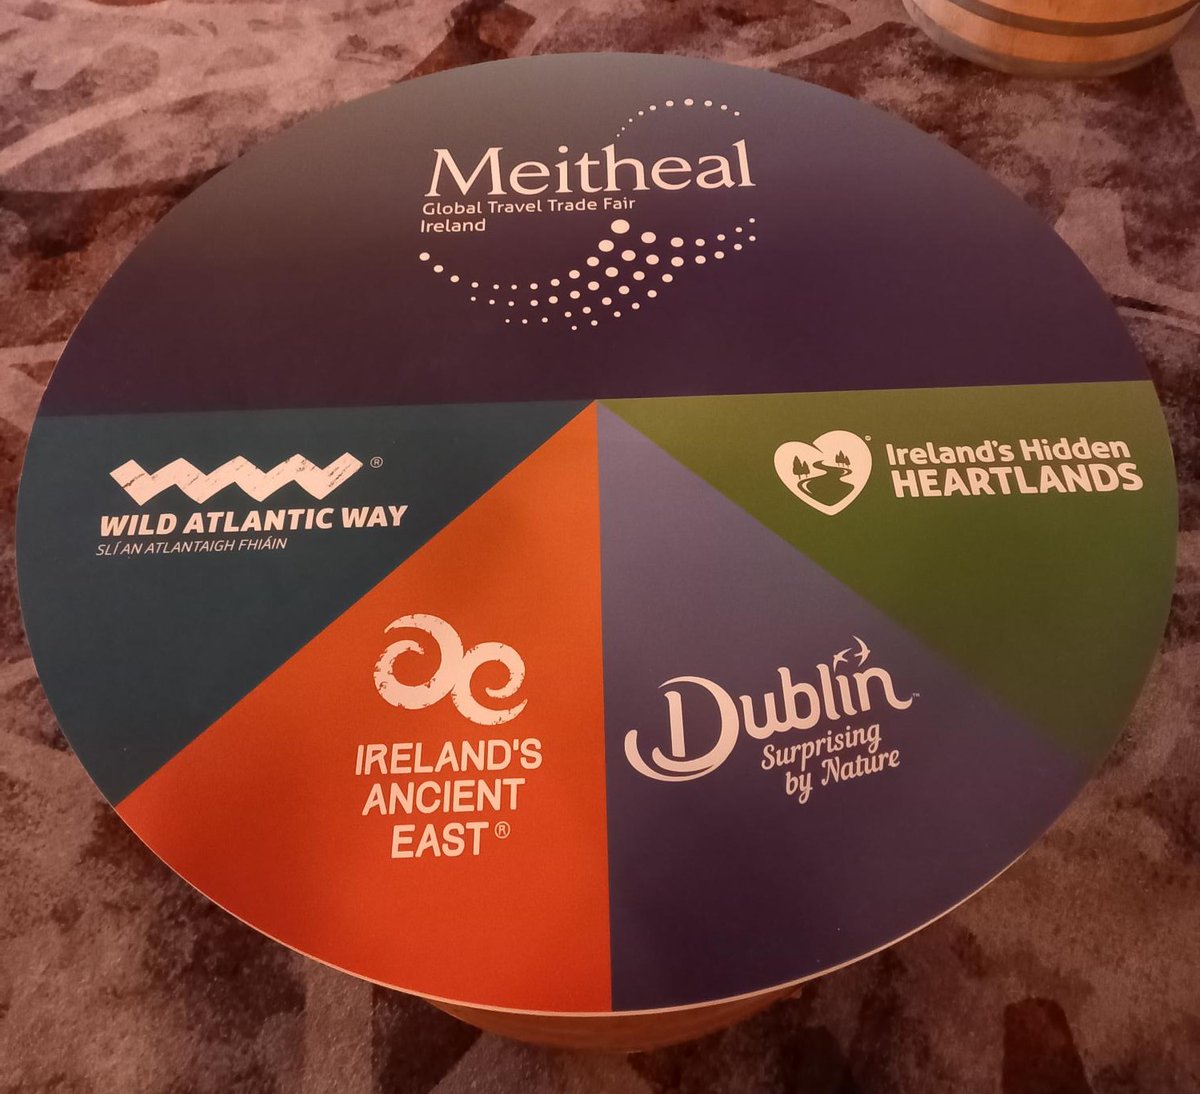 We had a great experience attending Meitheal last week - the global travel trade fair.

We presented our foodie experiences to overseas tourism buyers from over 20 different countries.

Many thanks to Fáilte Ireland and Ireland’s Ancient East for the opportunity.

#waterford